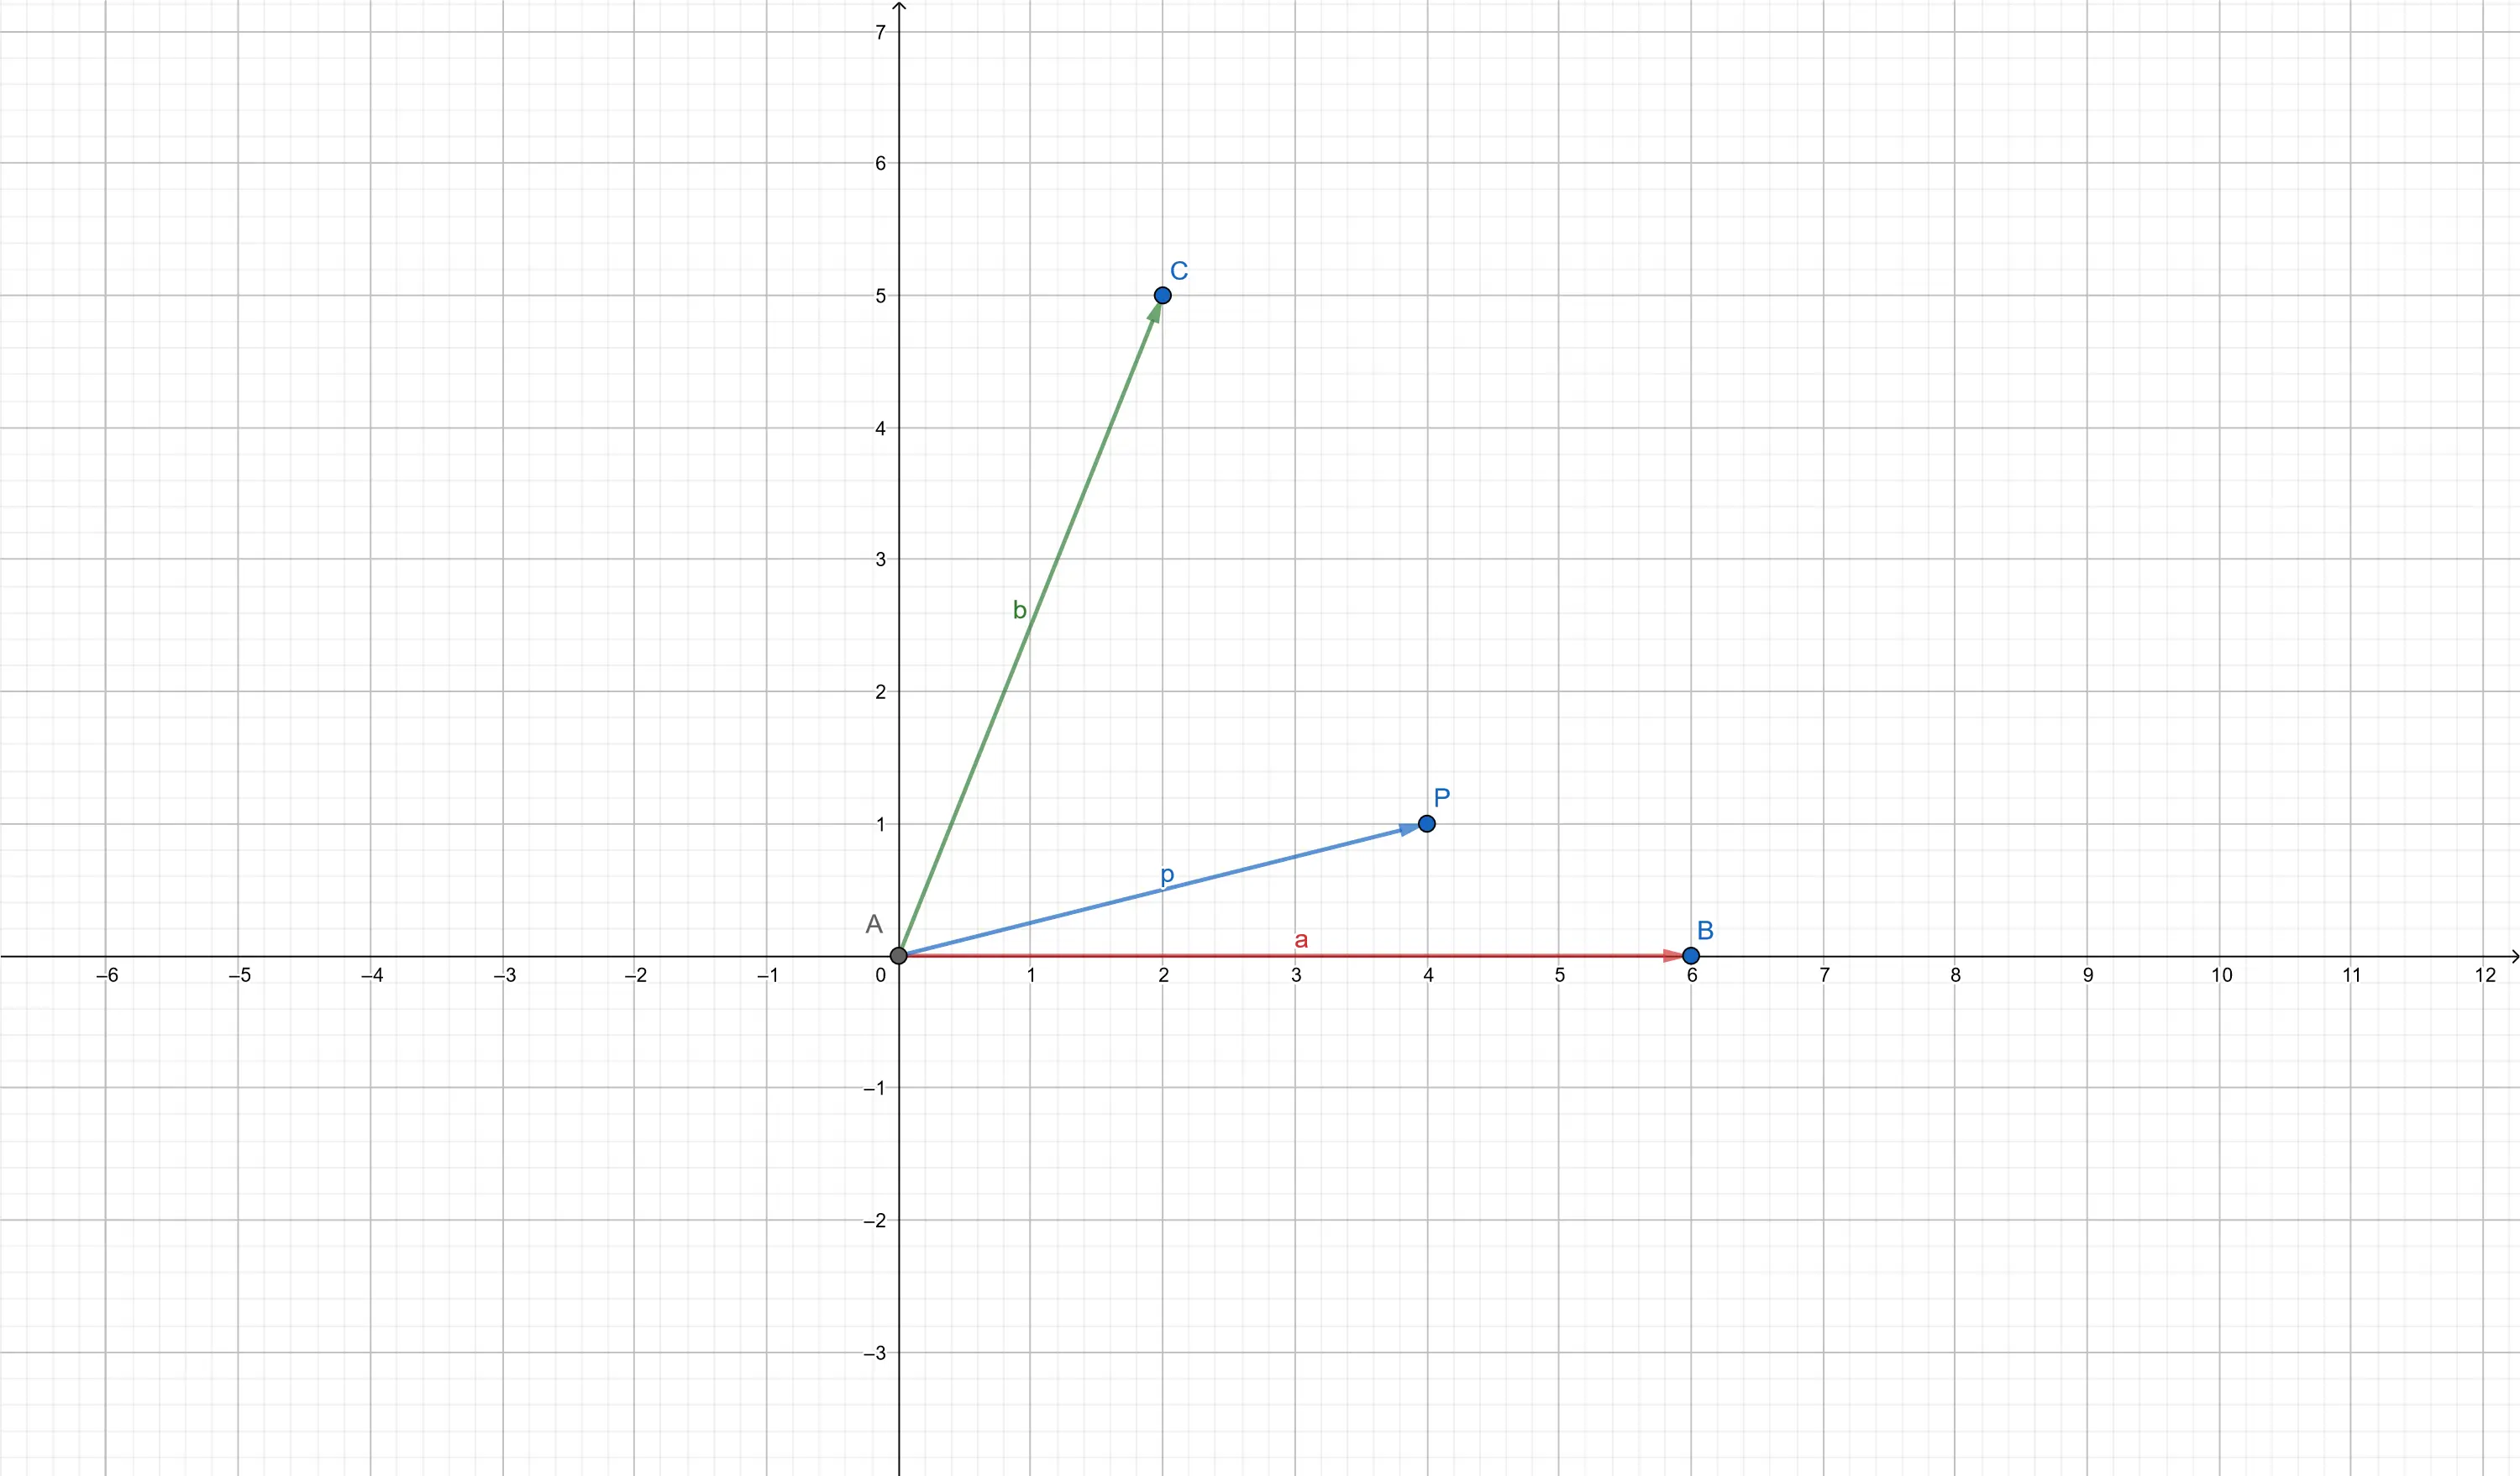 Vector as a sum of other vectors